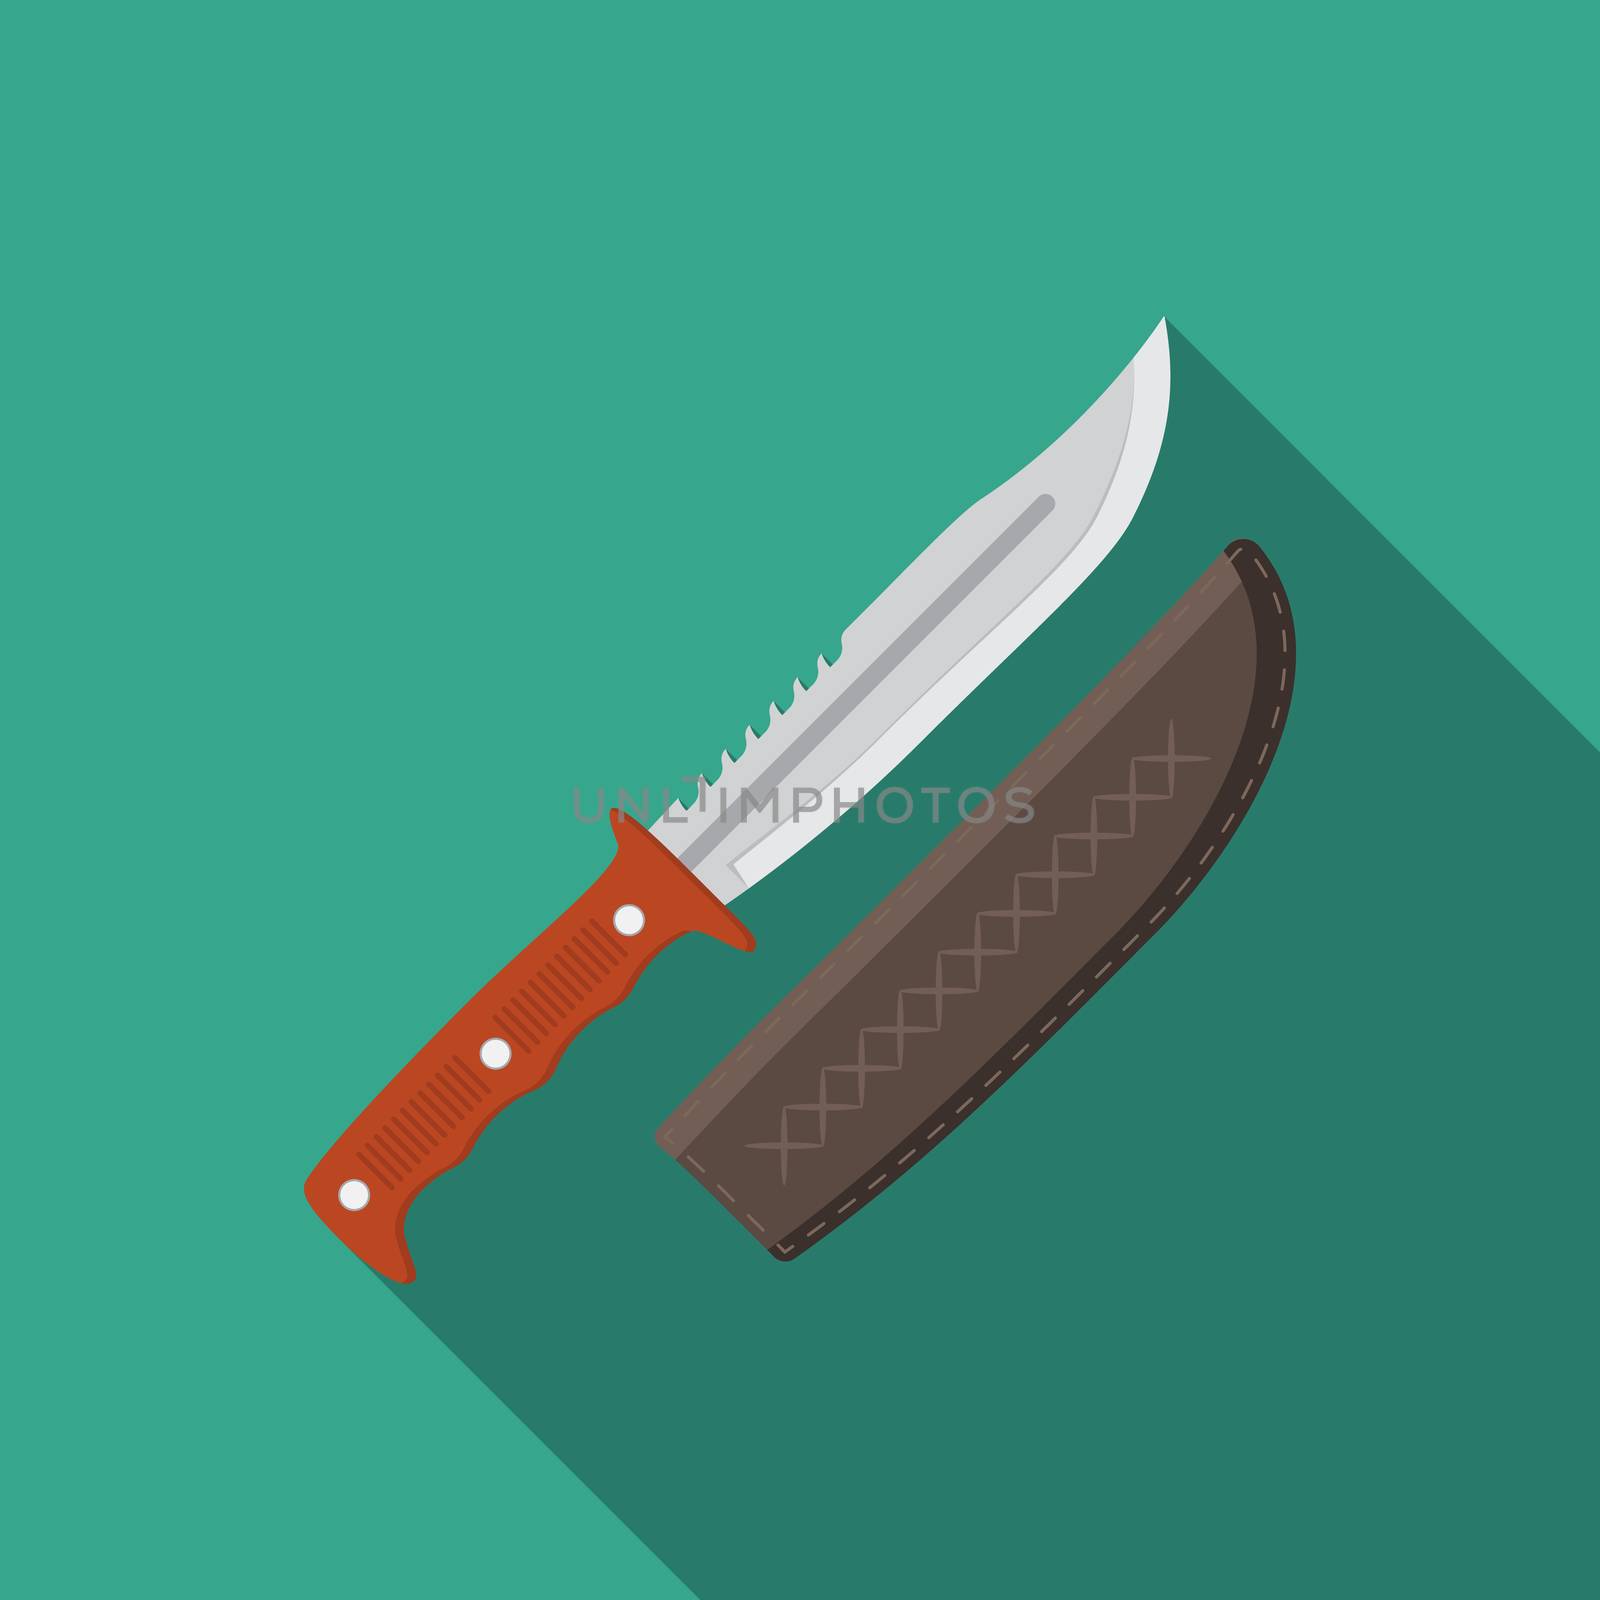 Flat design modern vector illustration of hunting knife icon, camping and hiking equipment with long shadow by Lemon_workshop